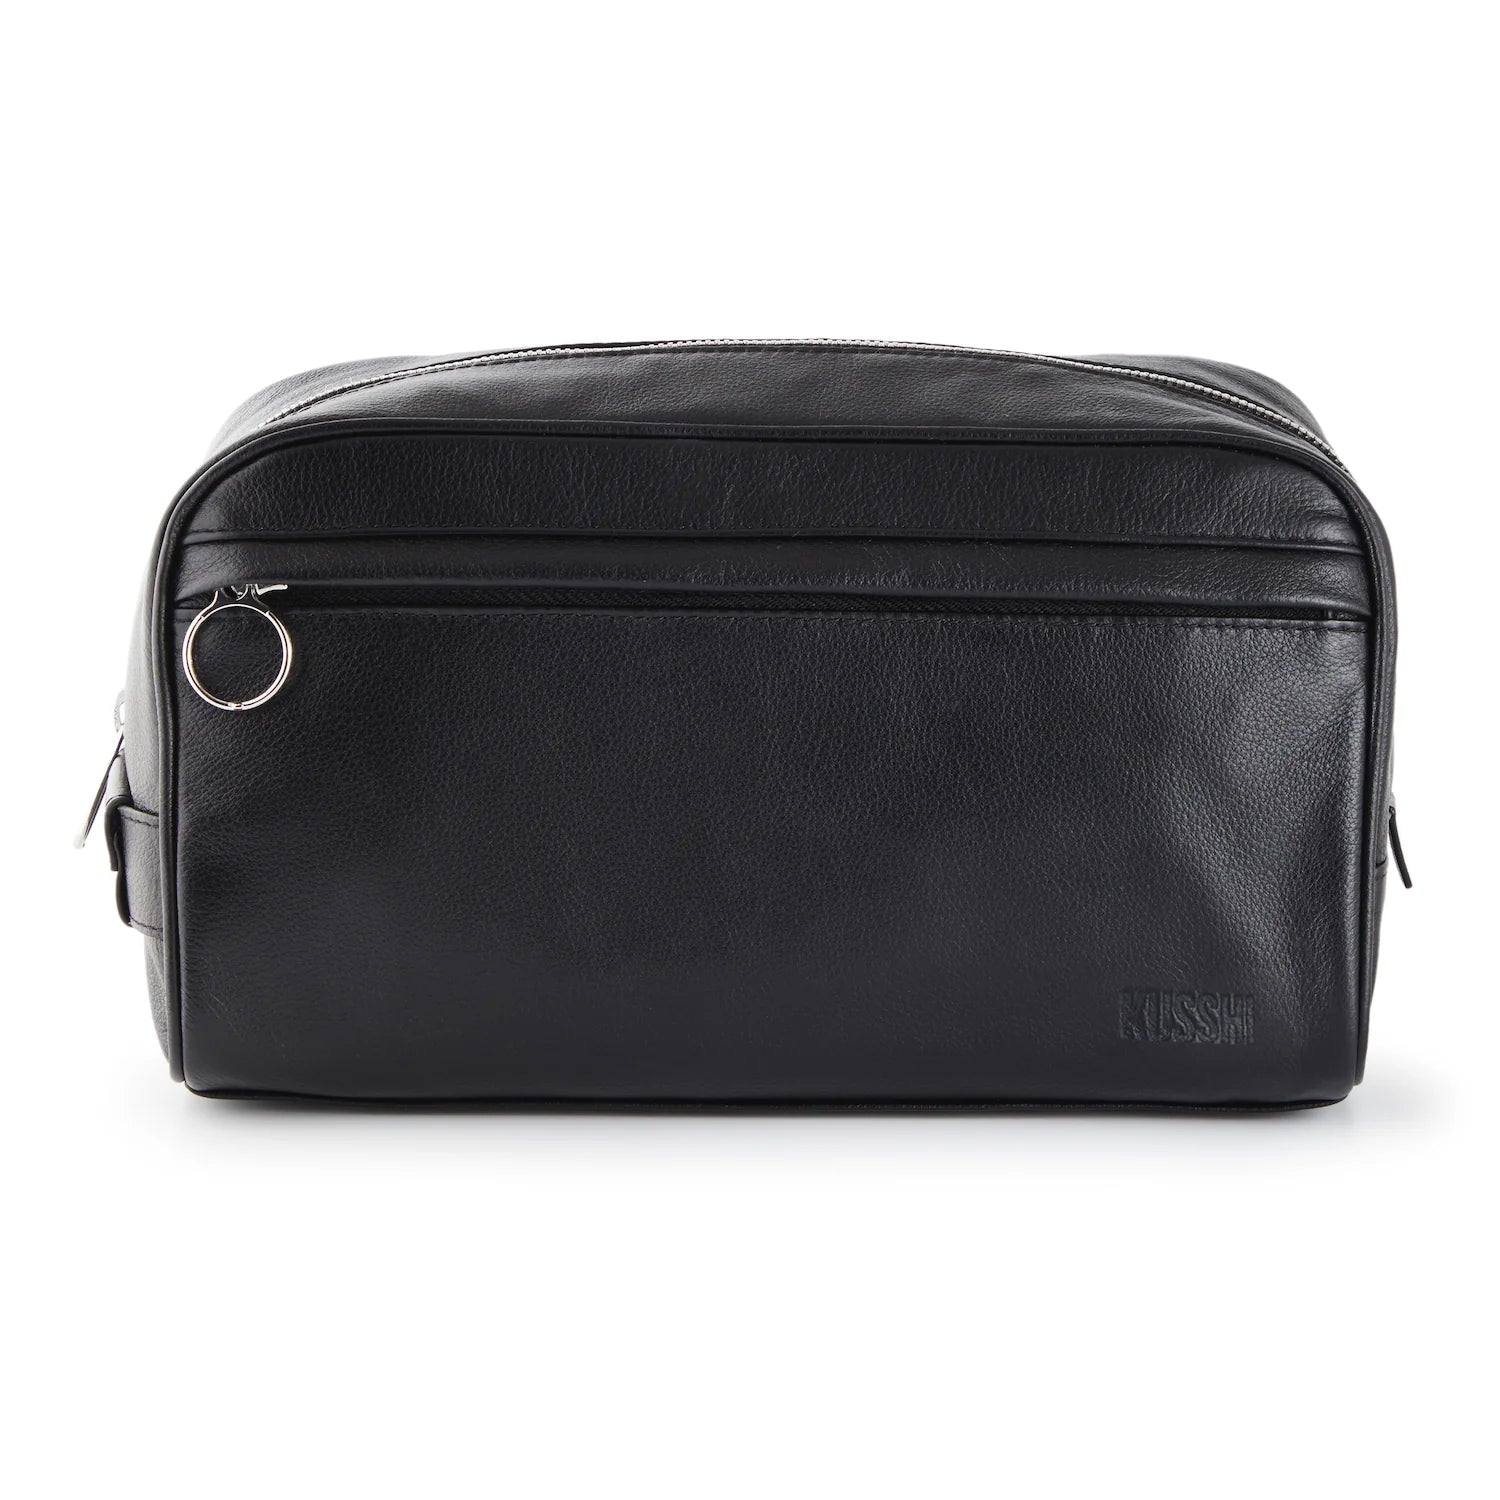 KUSSHI Dopp Kit Black Leather with Cool Blue